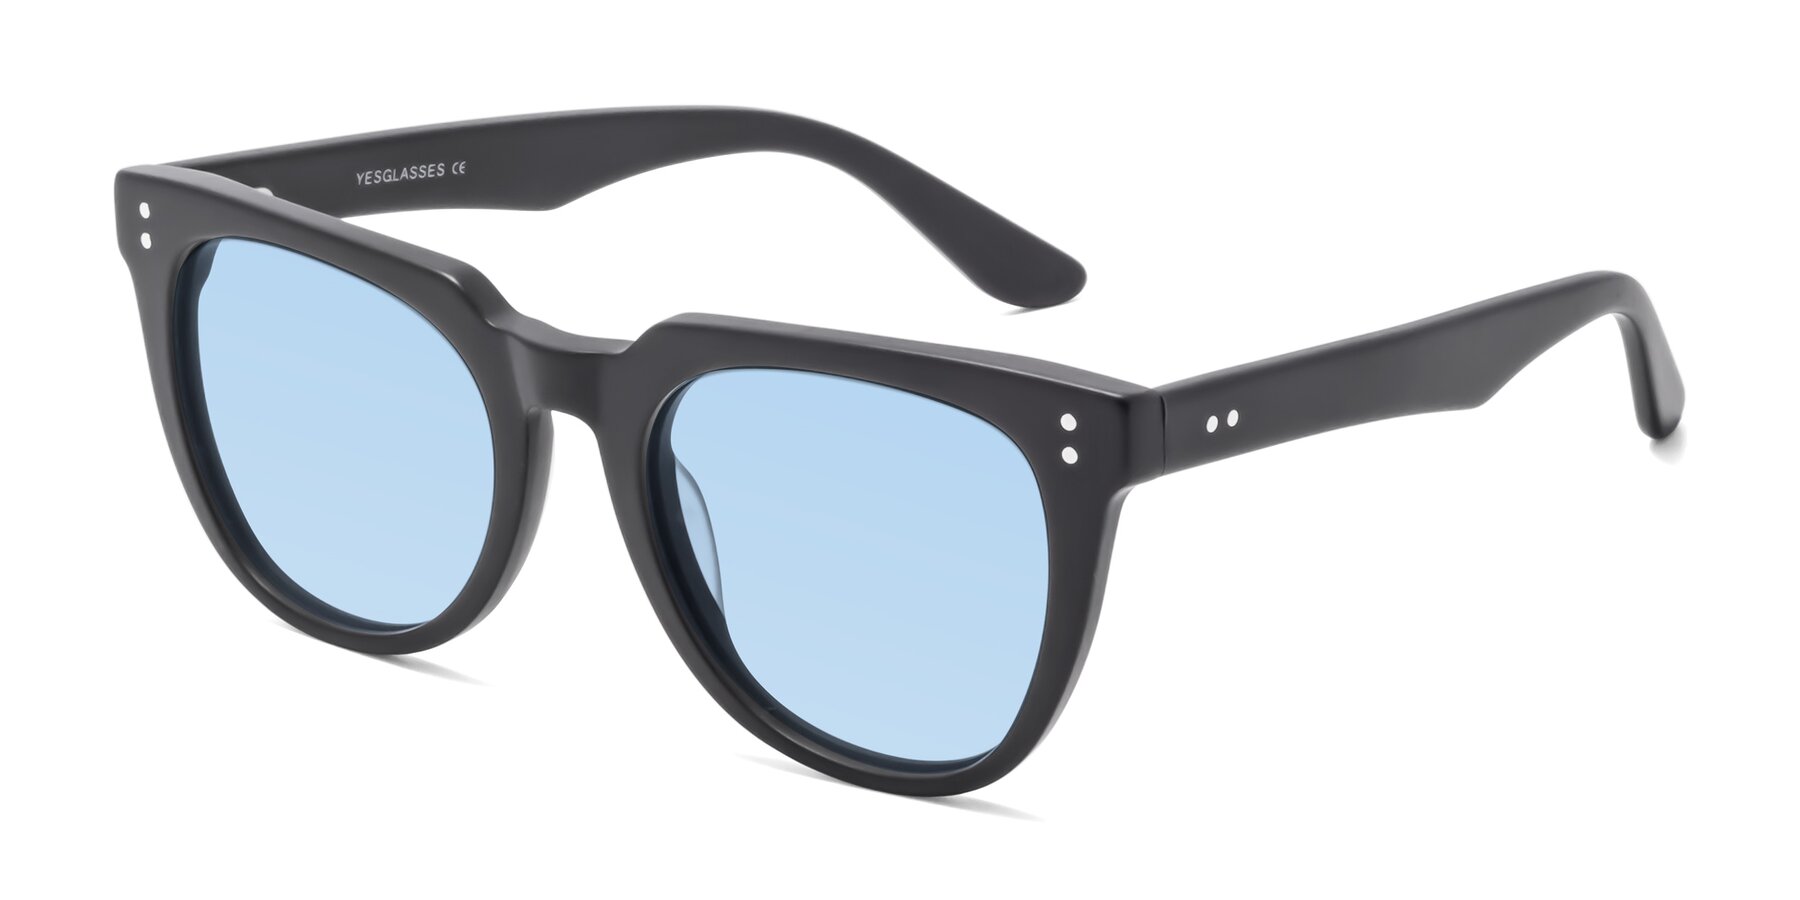 Angle of Graceful in Matte Black with Light Blue Tinted Lenses